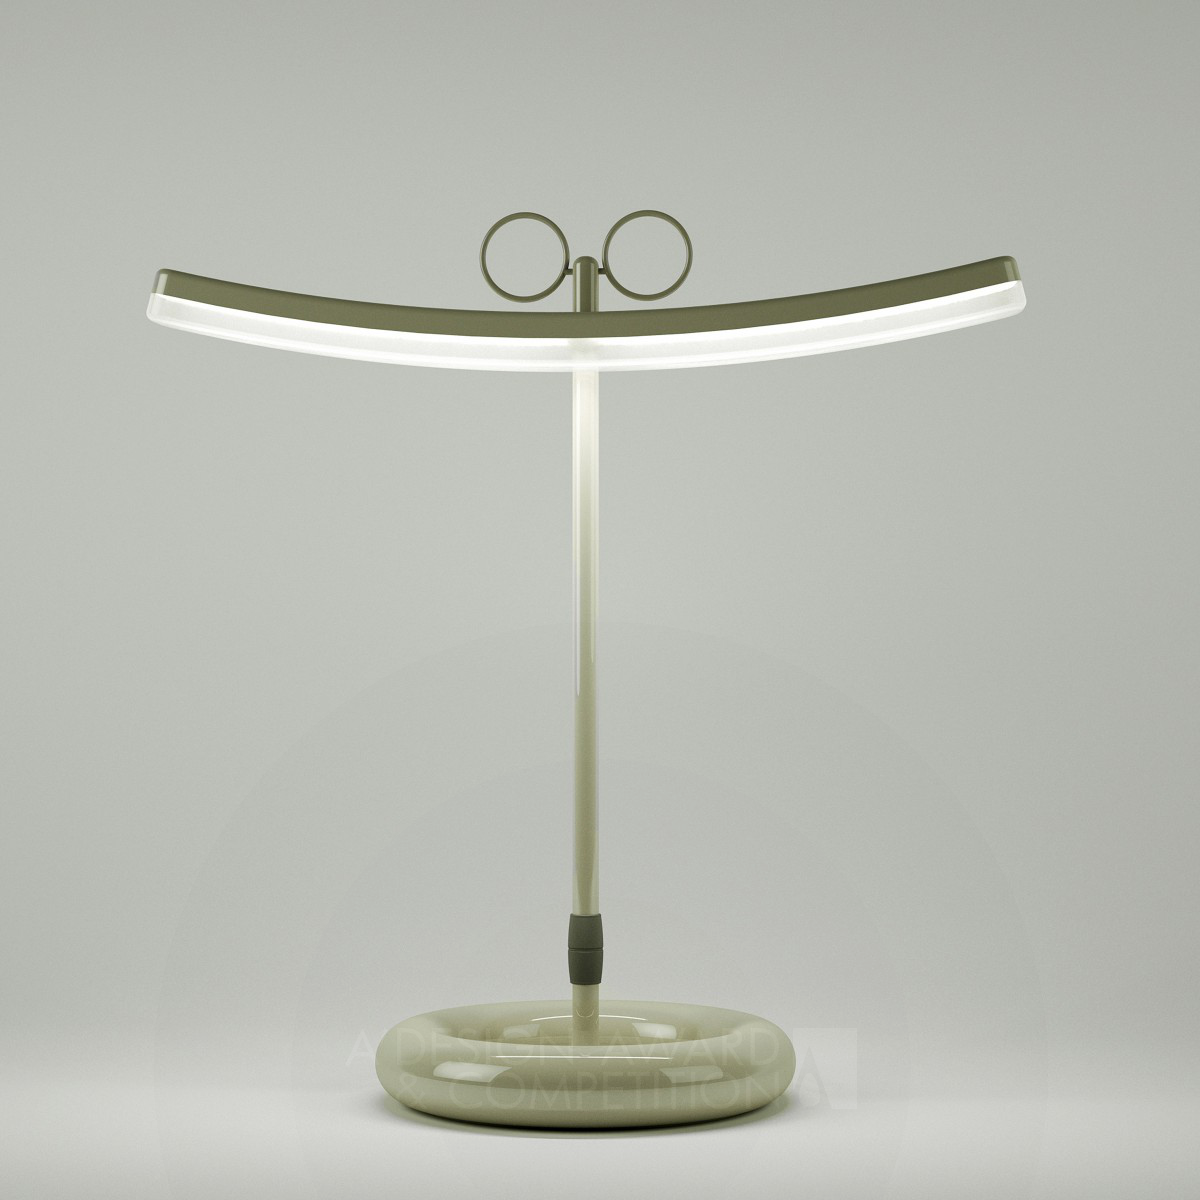 Moods Desk Table Lamp by Francesco Cappuccio Iron Lighting Products and Fixtures Design Award Winner 2019 